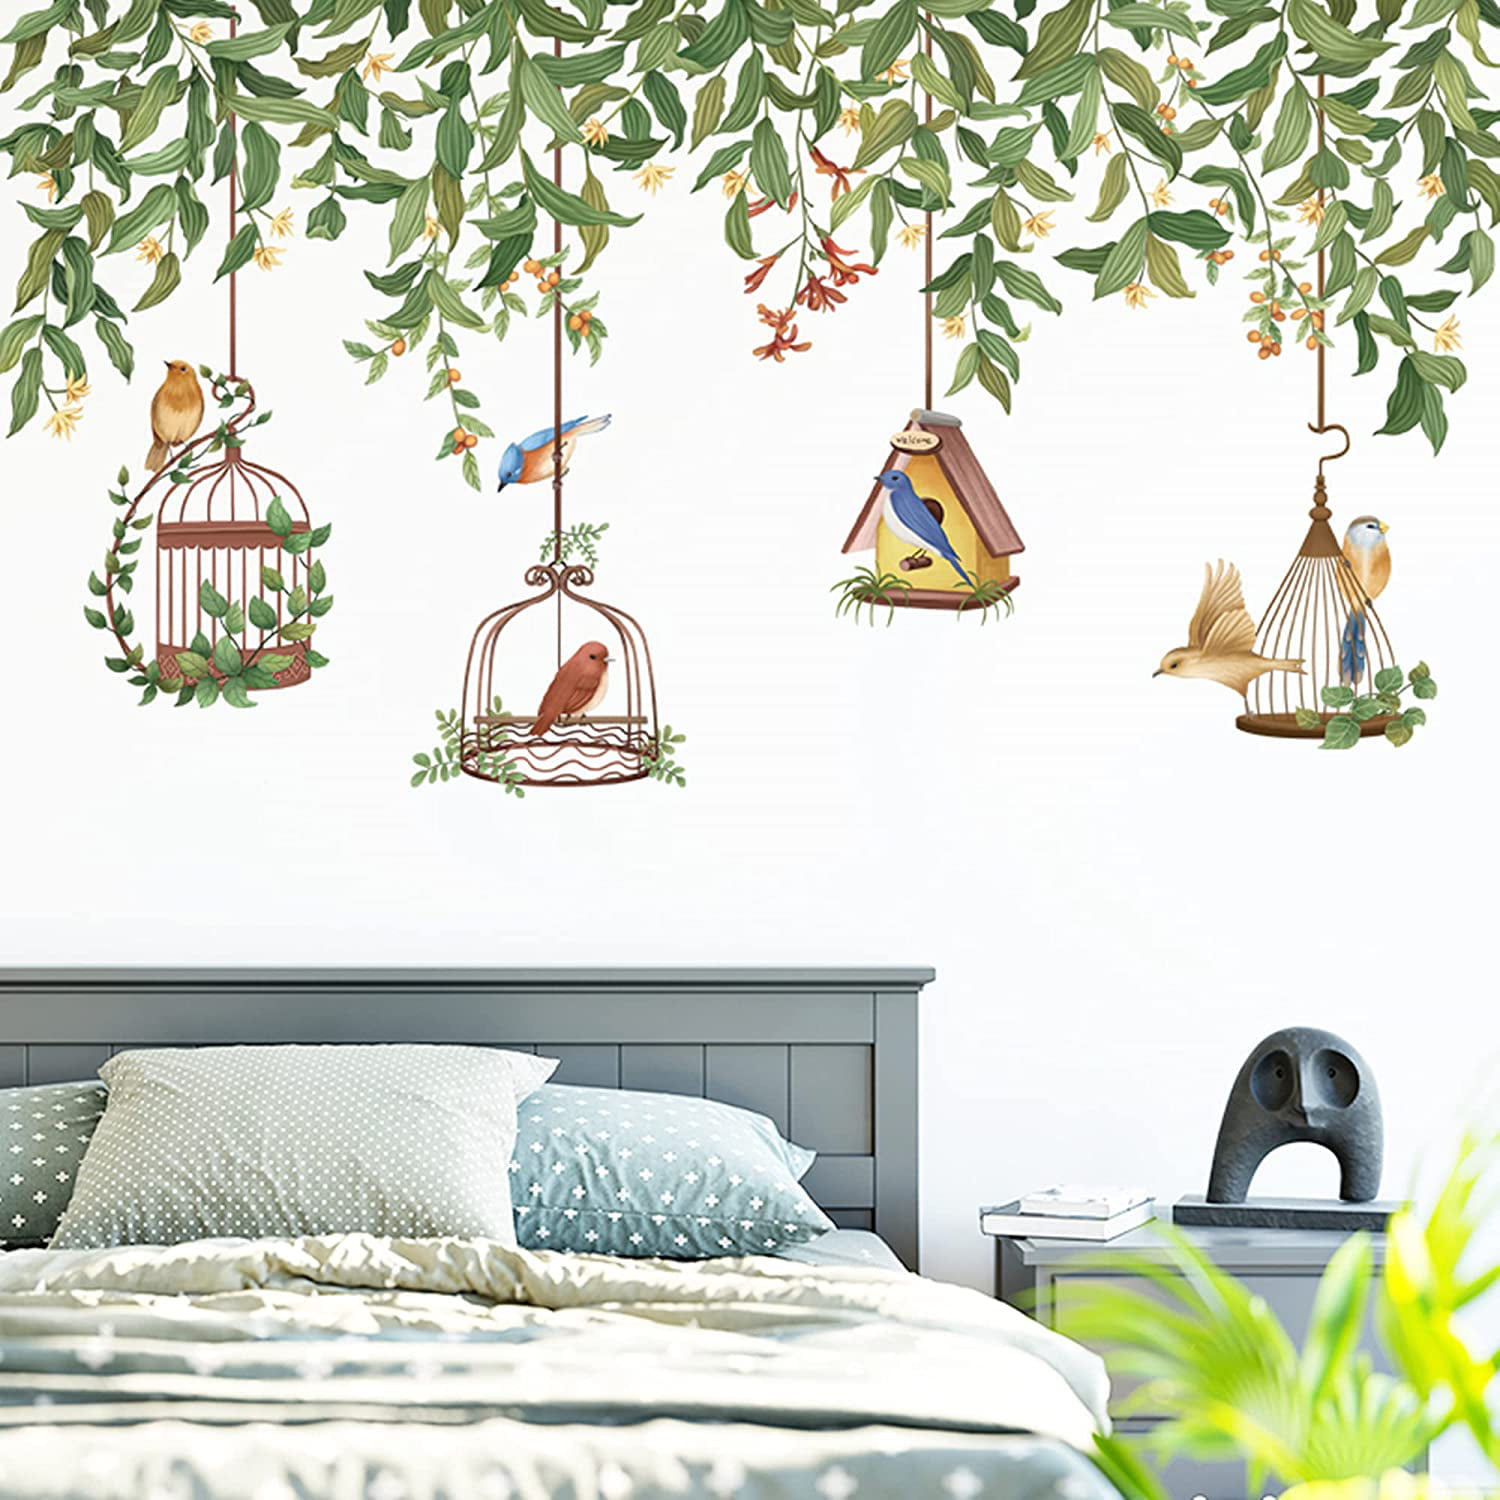 Wall Sticker Decal Mural Removable PVC Wall Sticker Home Decoration Multi-Choose 